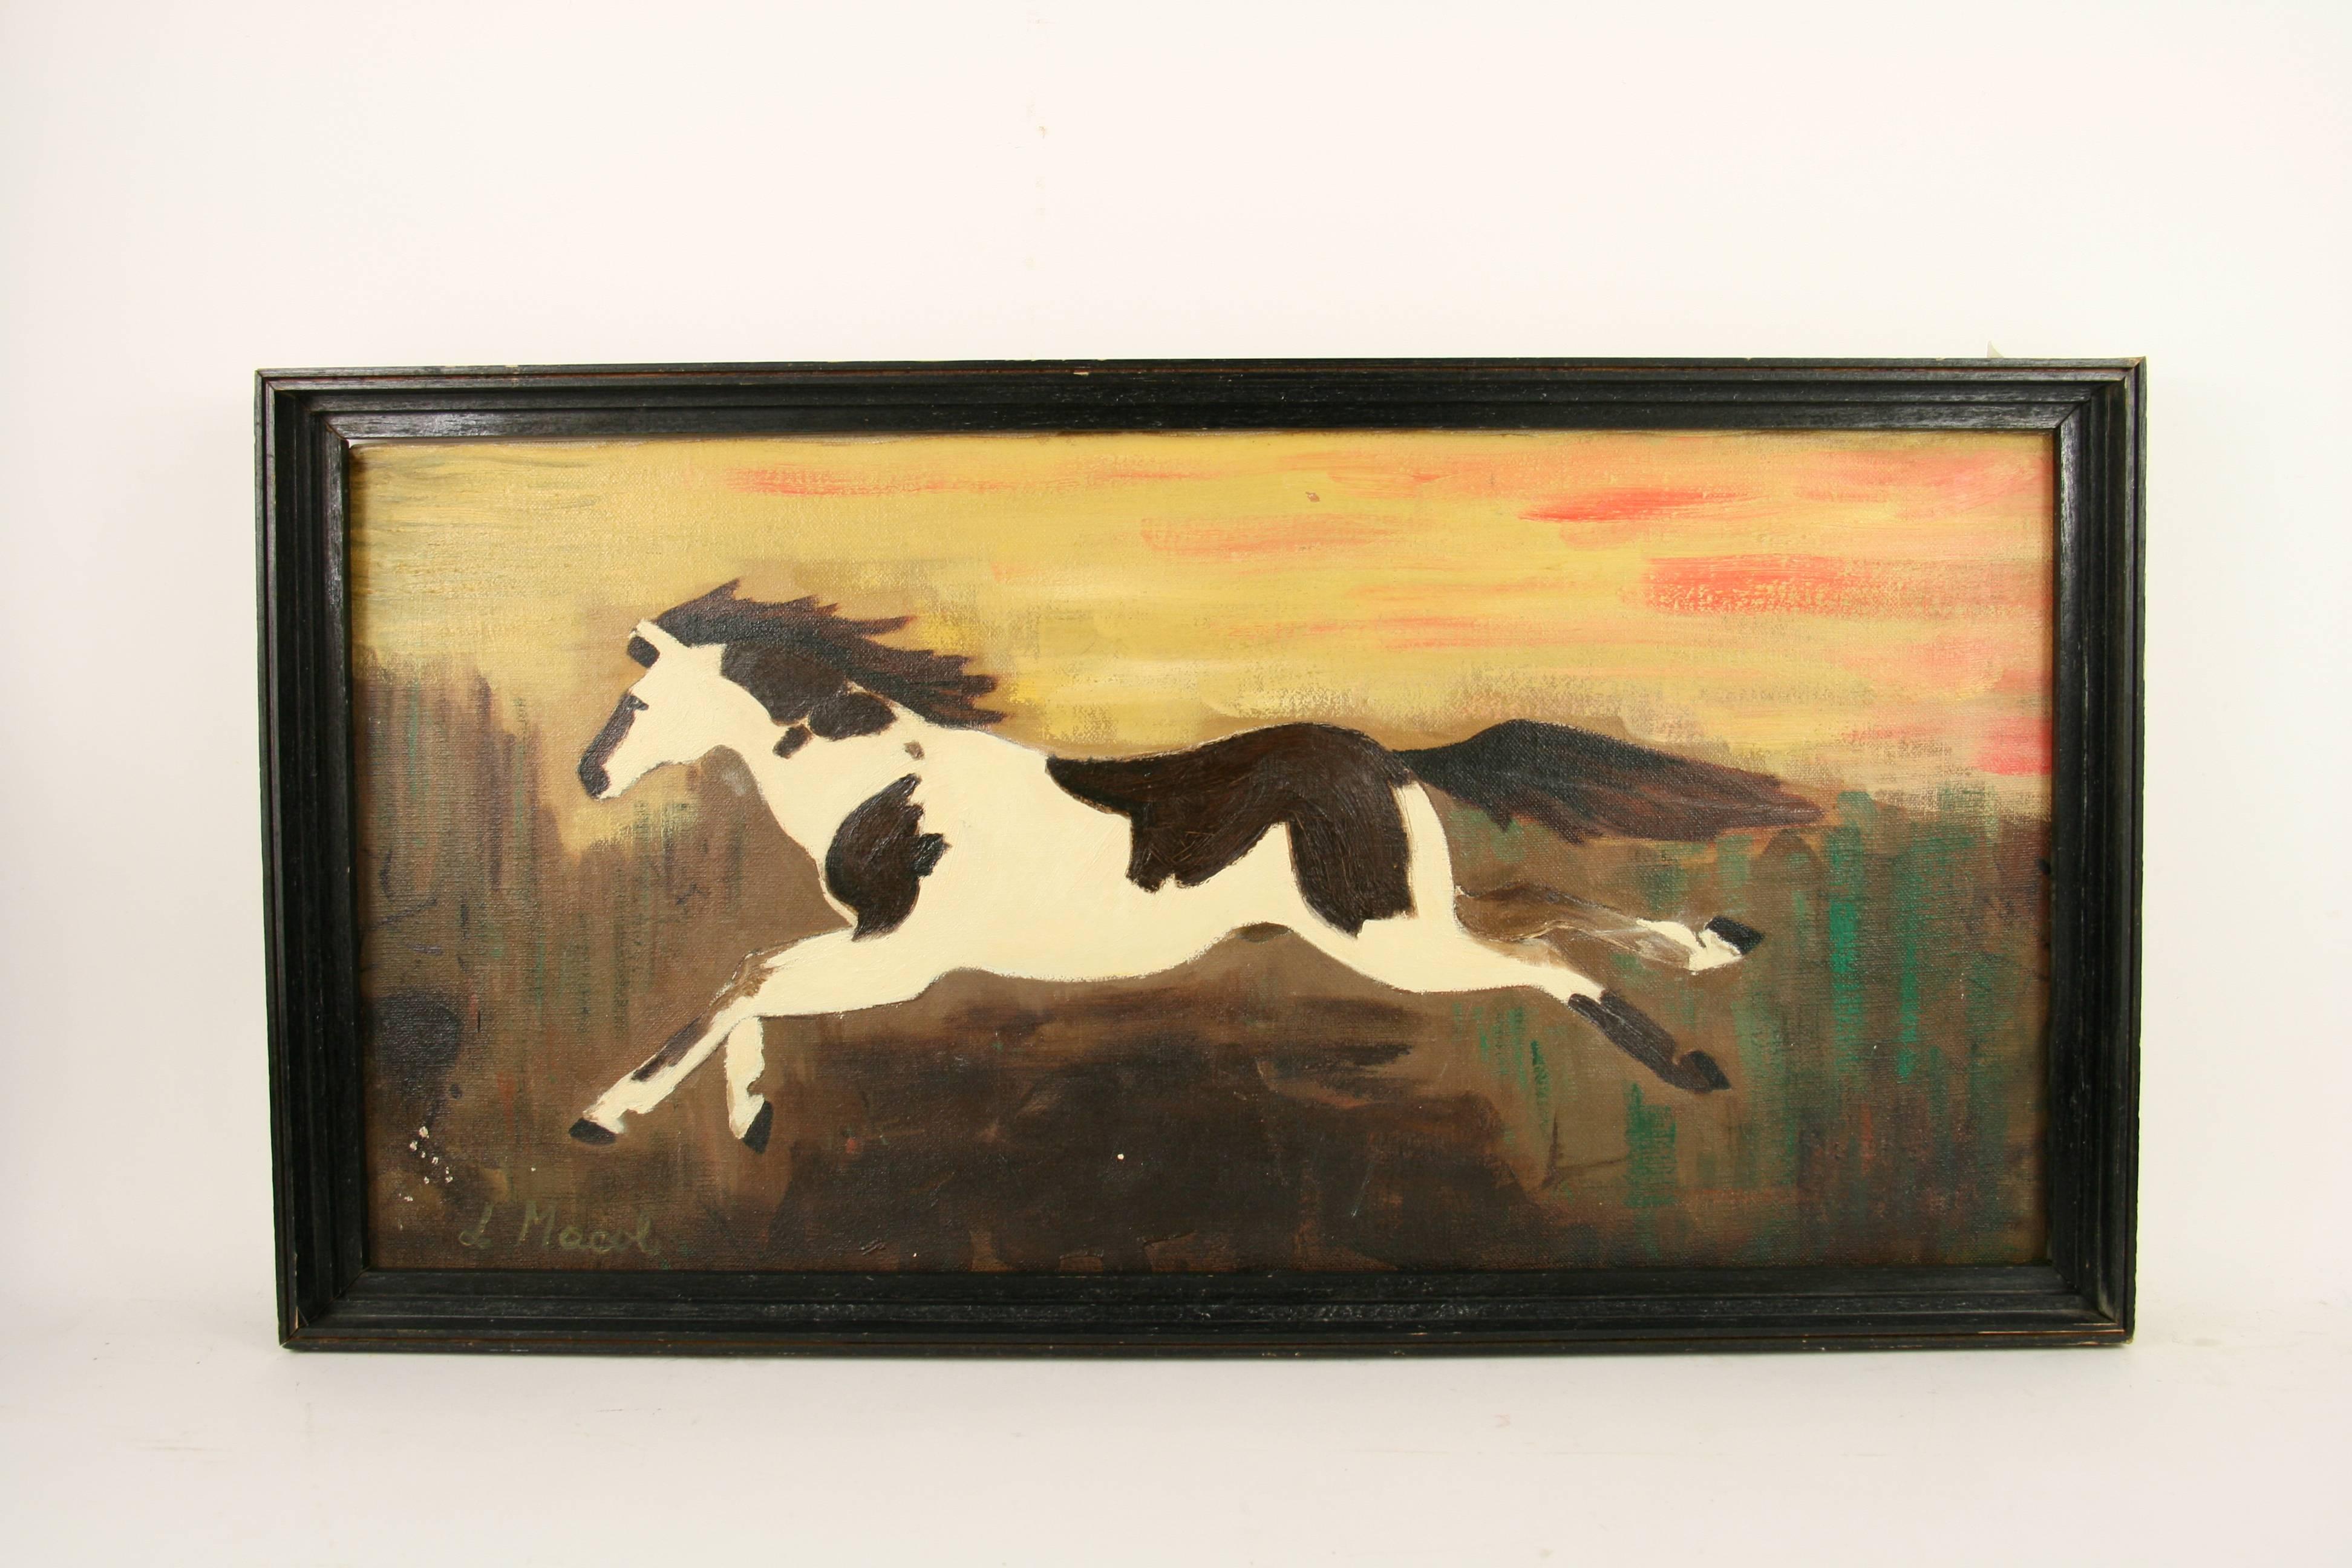 L.Macol Animal Painting - Pinto Equestrian Painting 